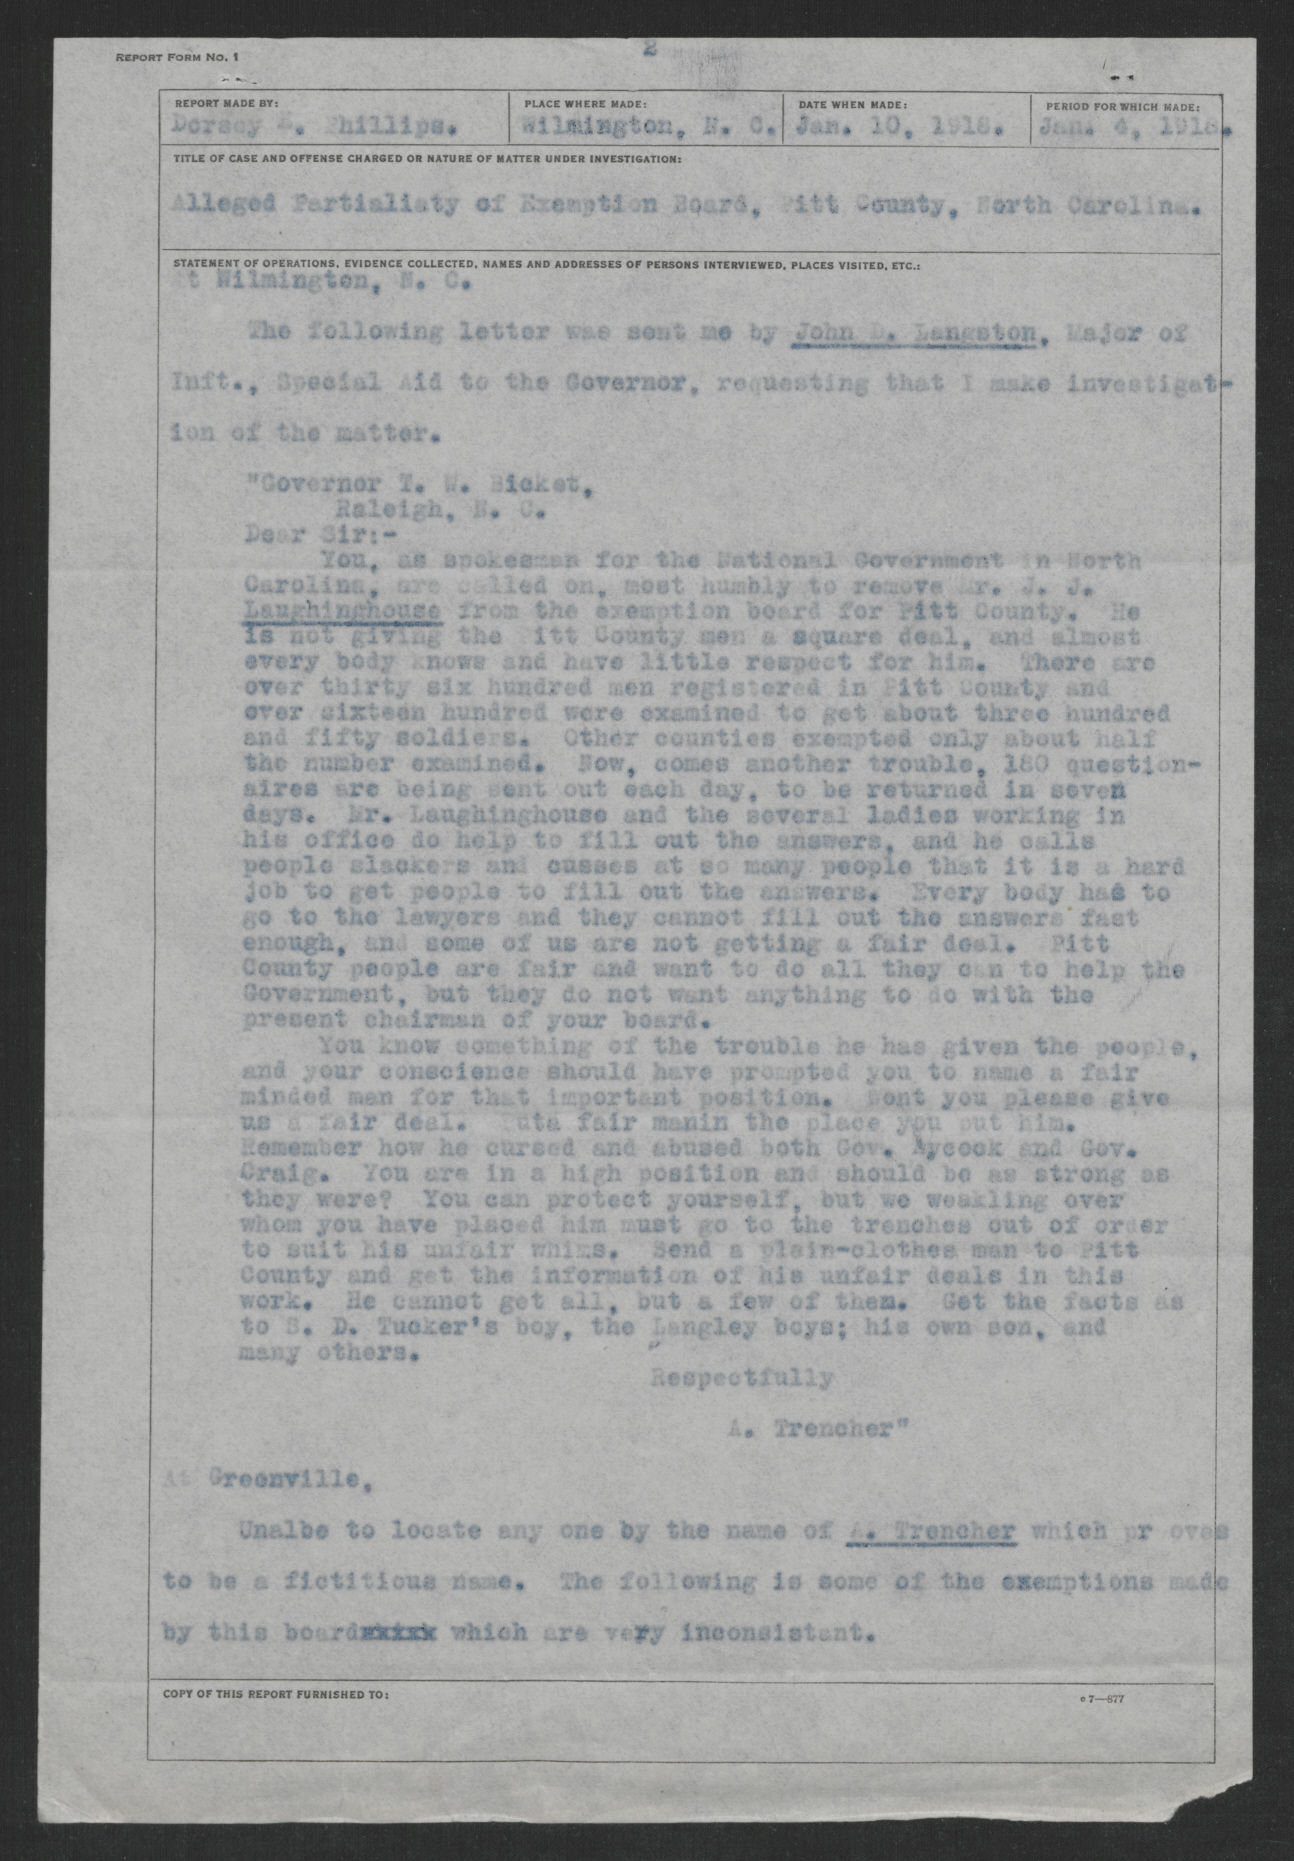 Report on Alleged Partiality of the Pitt County Exemption Board, January 10, 1918, page 1